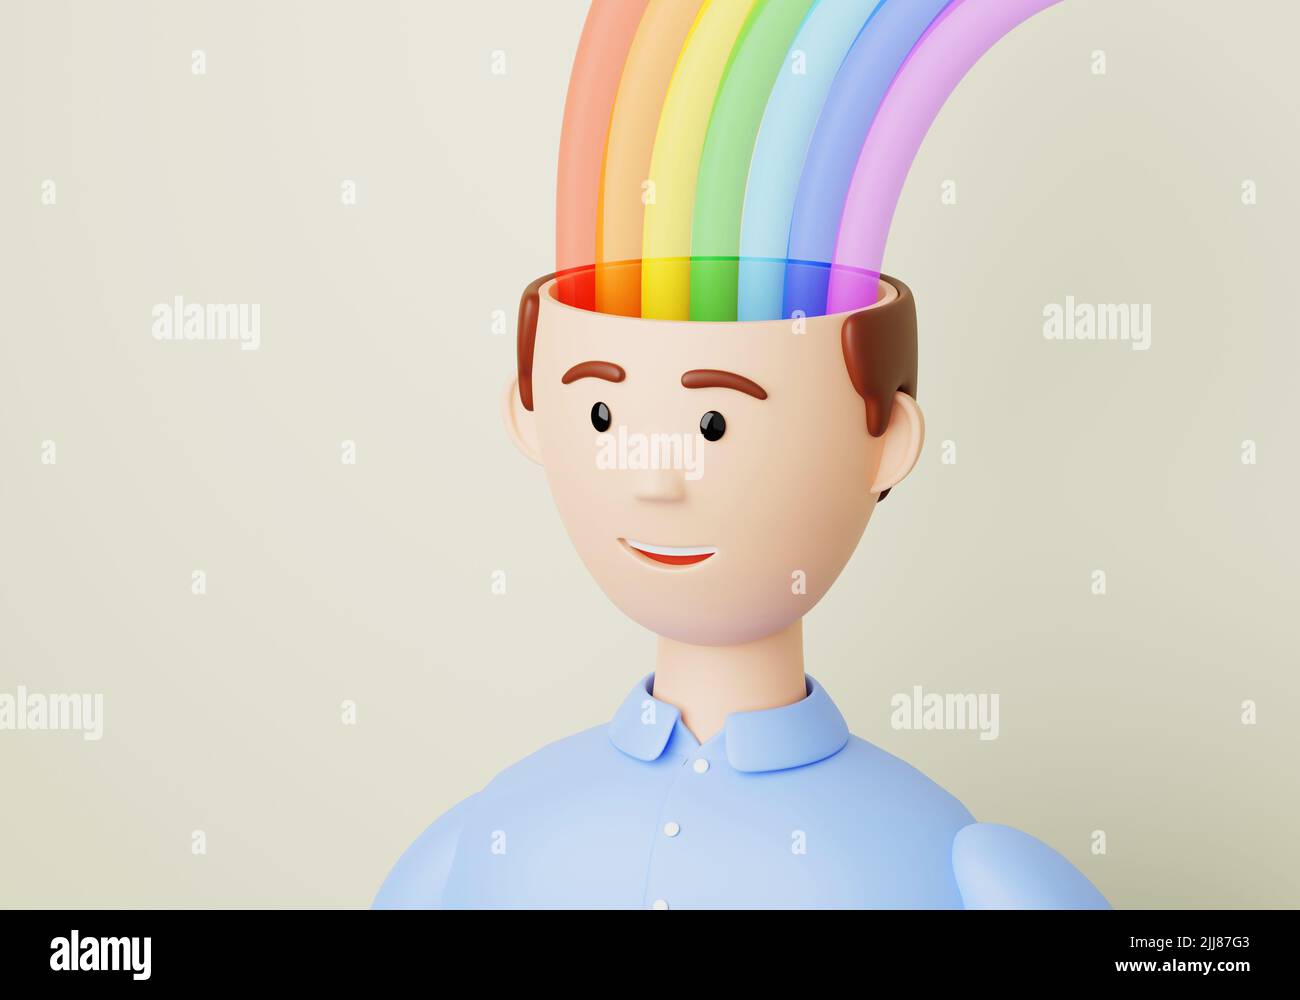 Rainbow in the head as a symbol of creativity, joy and fun. 3d render. Stock Photo